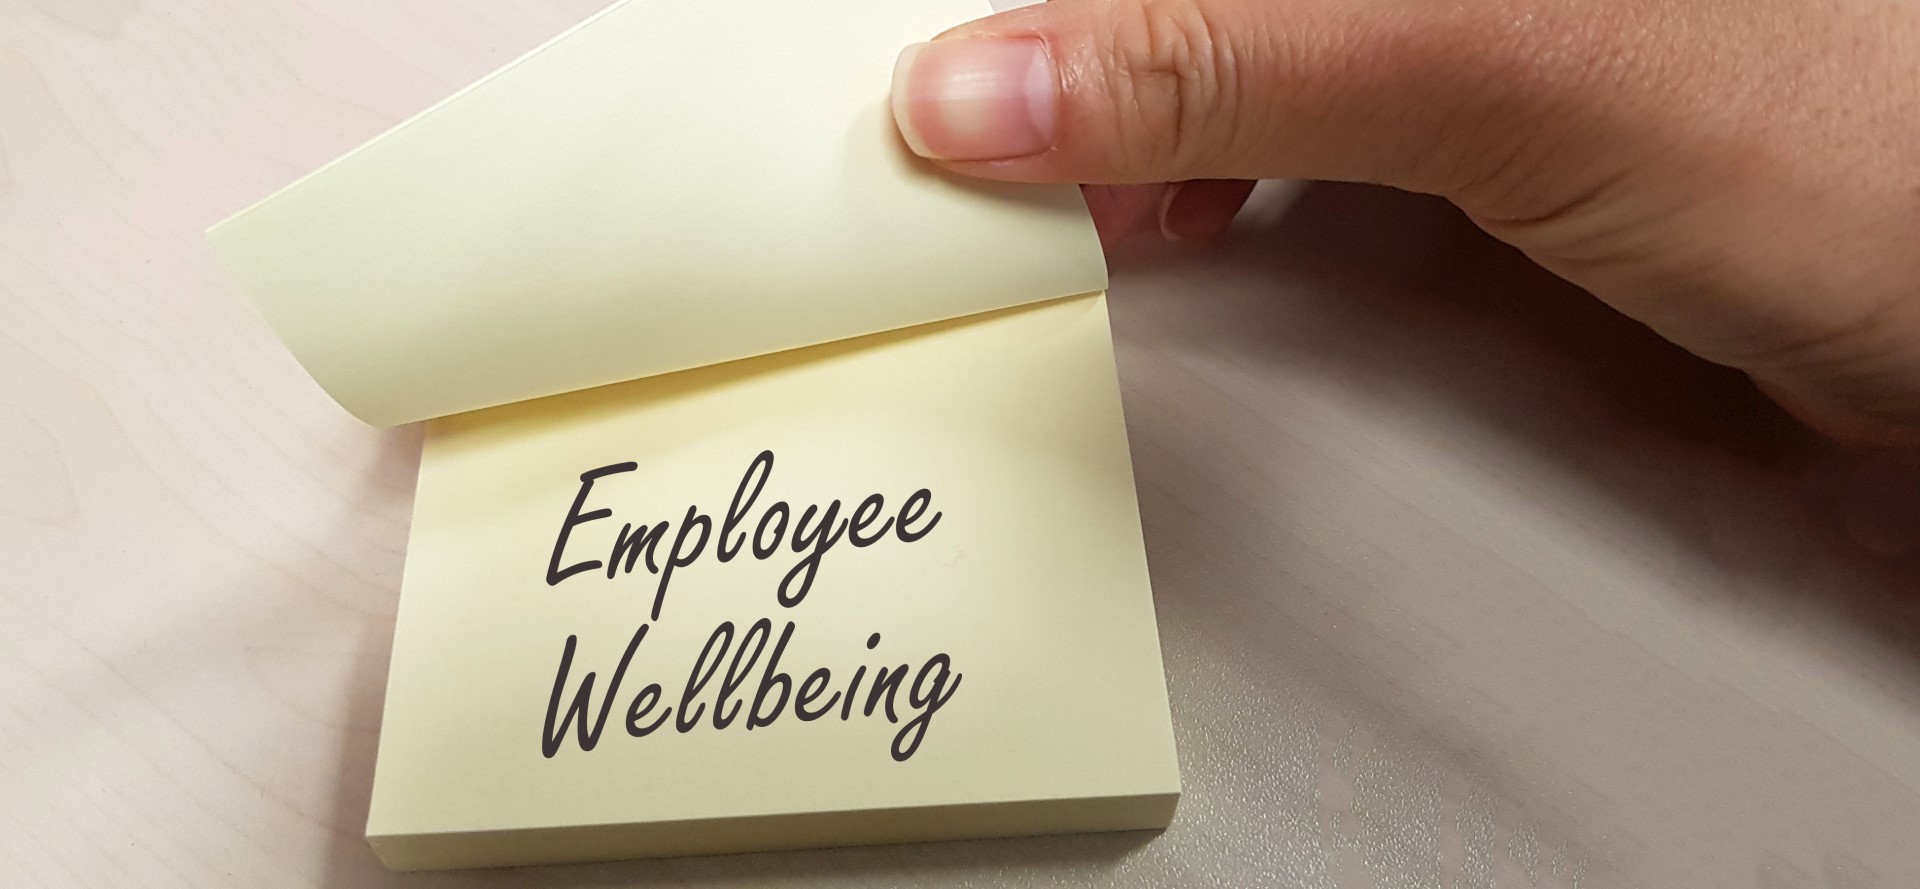 sticky note with employee wellbeing written on it